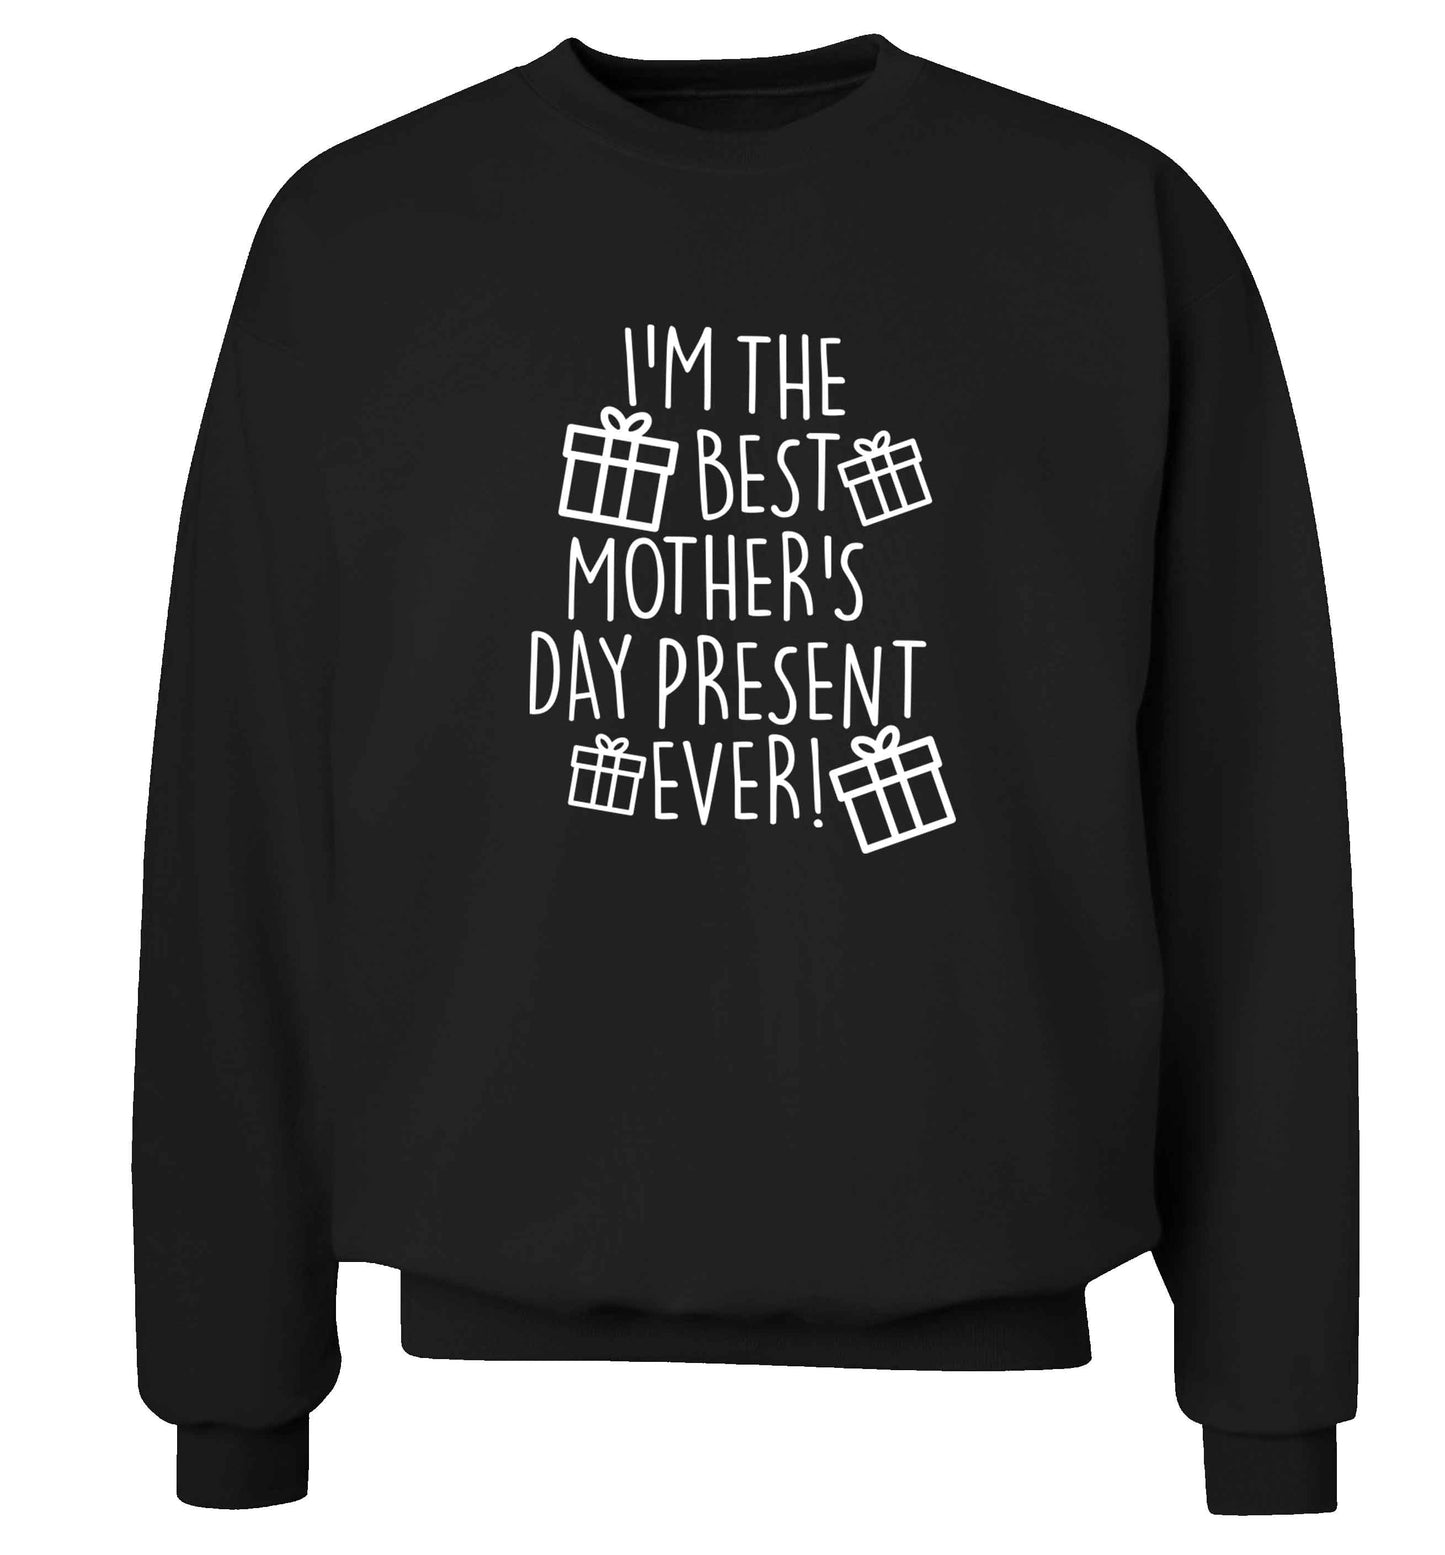 I'm the best mother's day present ever! adult's unisex black sweater 2XL